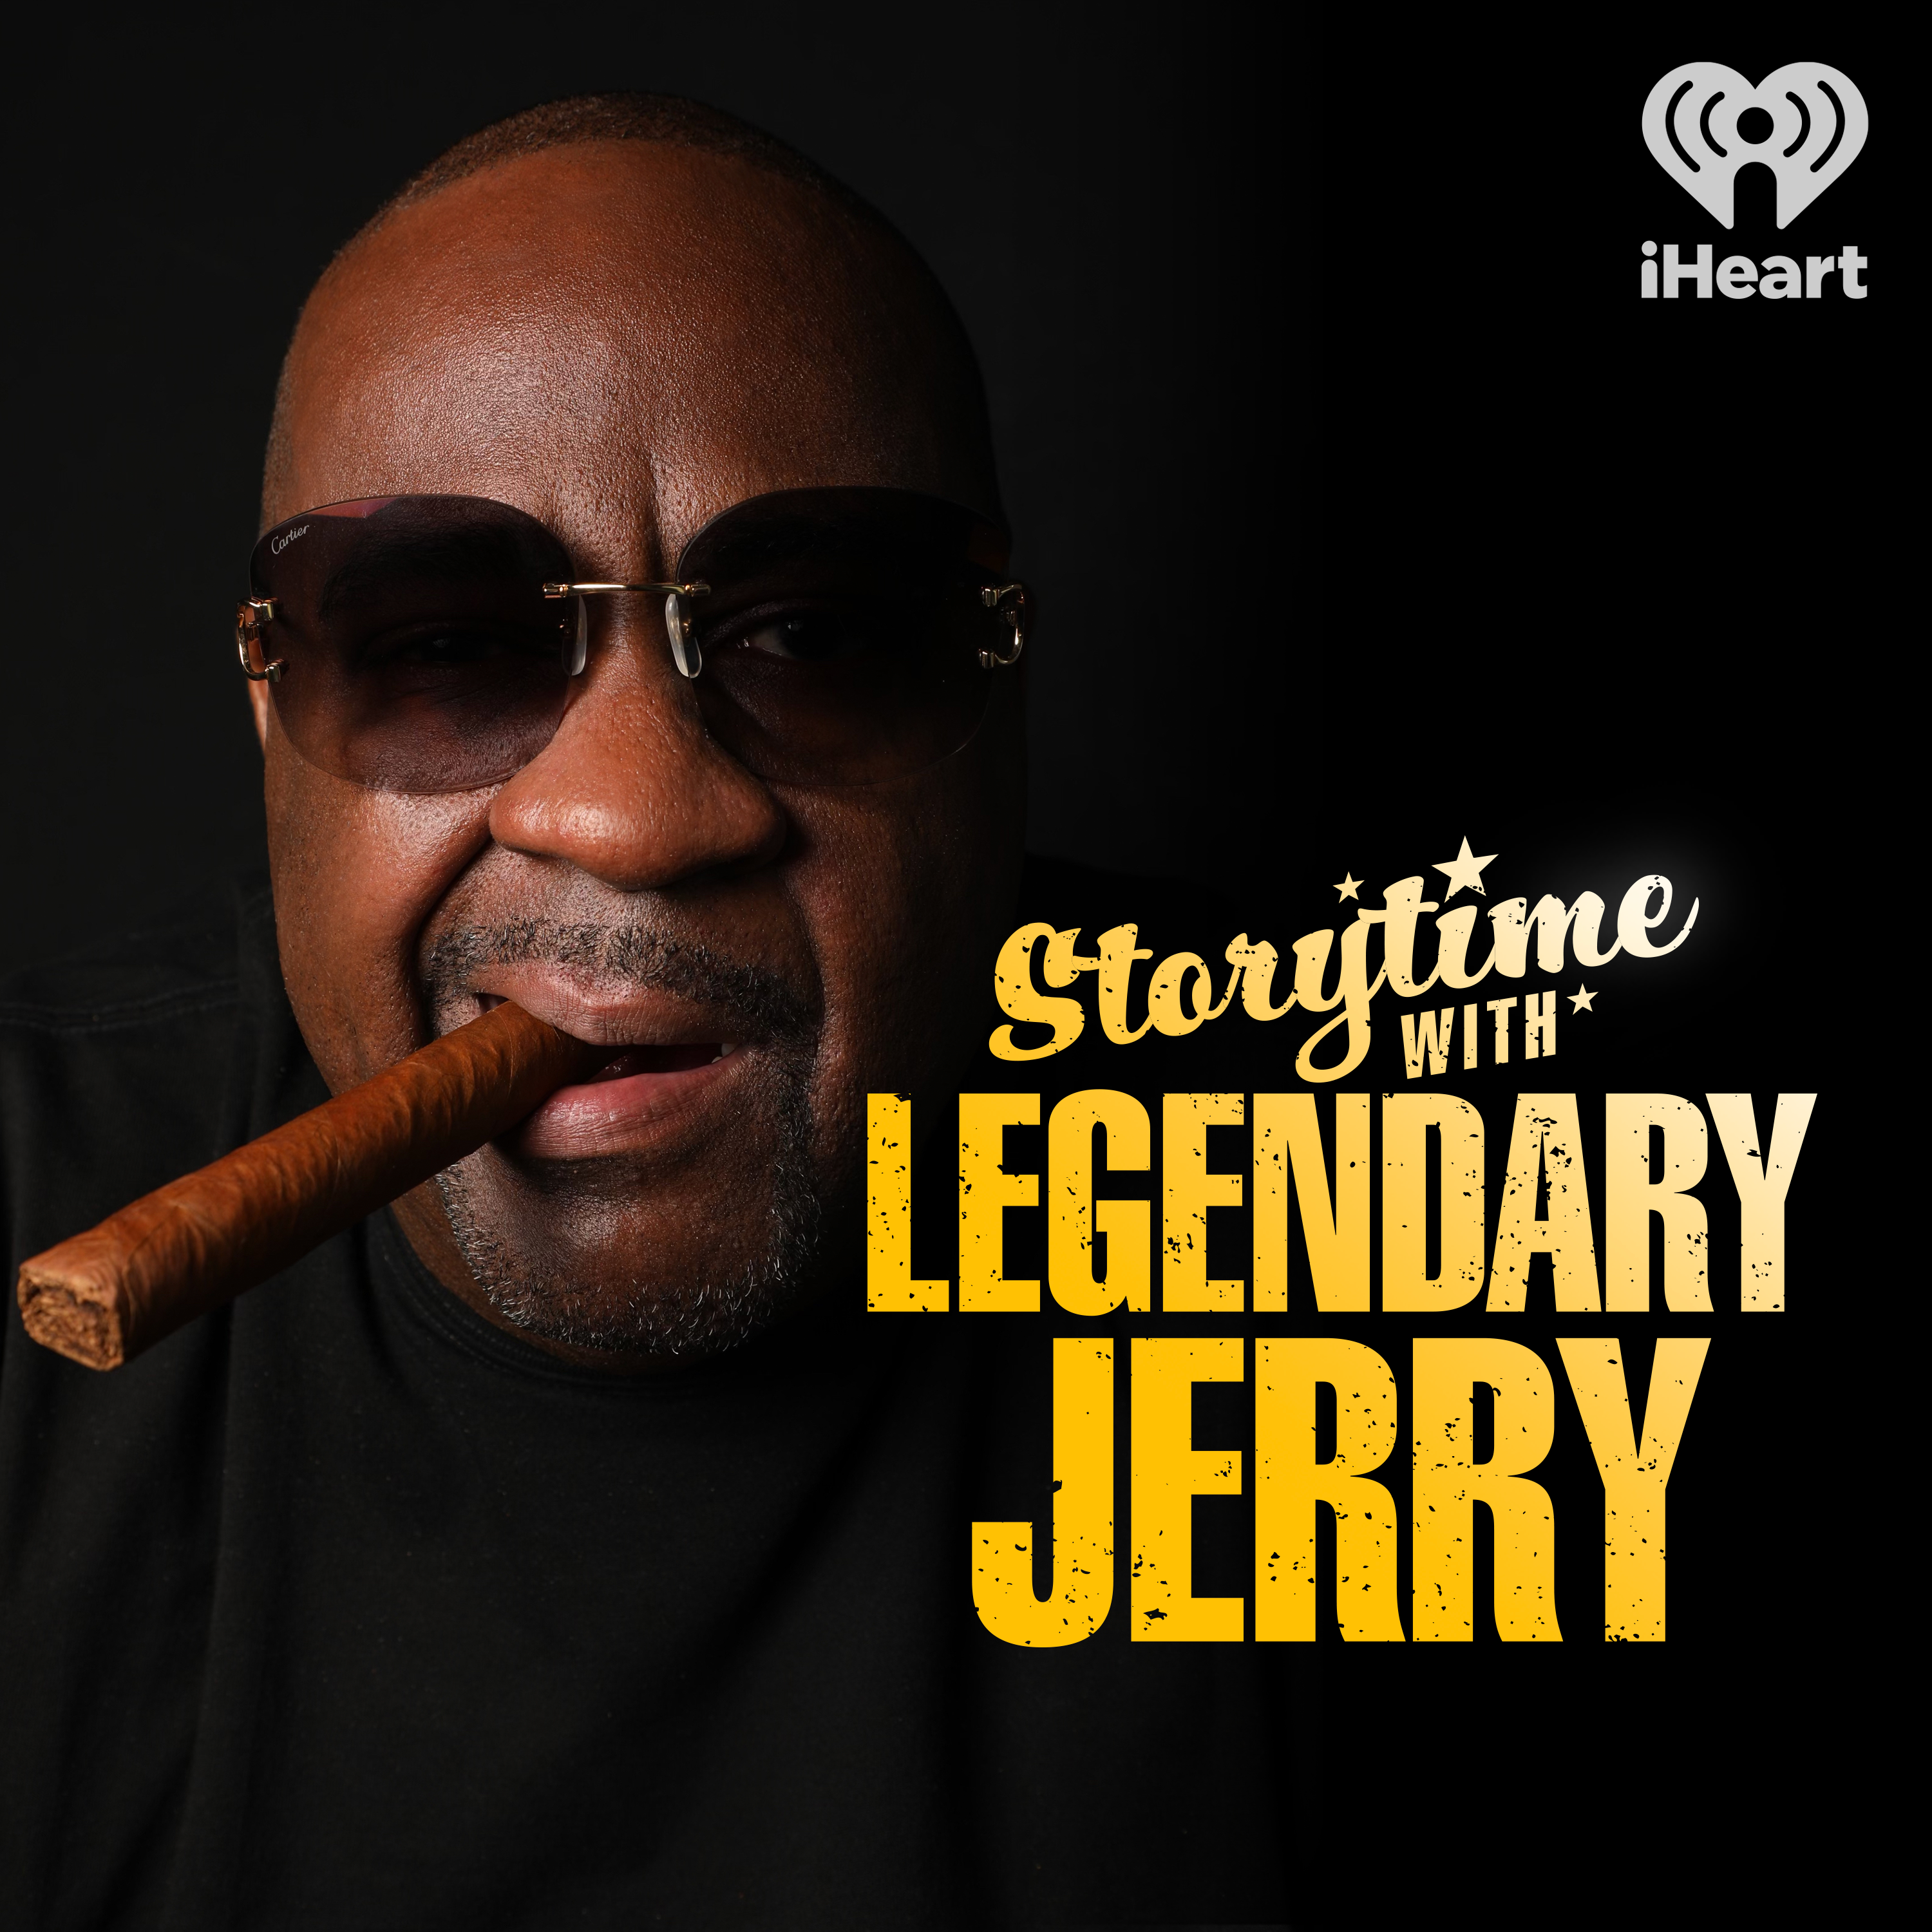 Princess from Crime Mob - StoryTime with Legendary Jerry - NuFace Segment